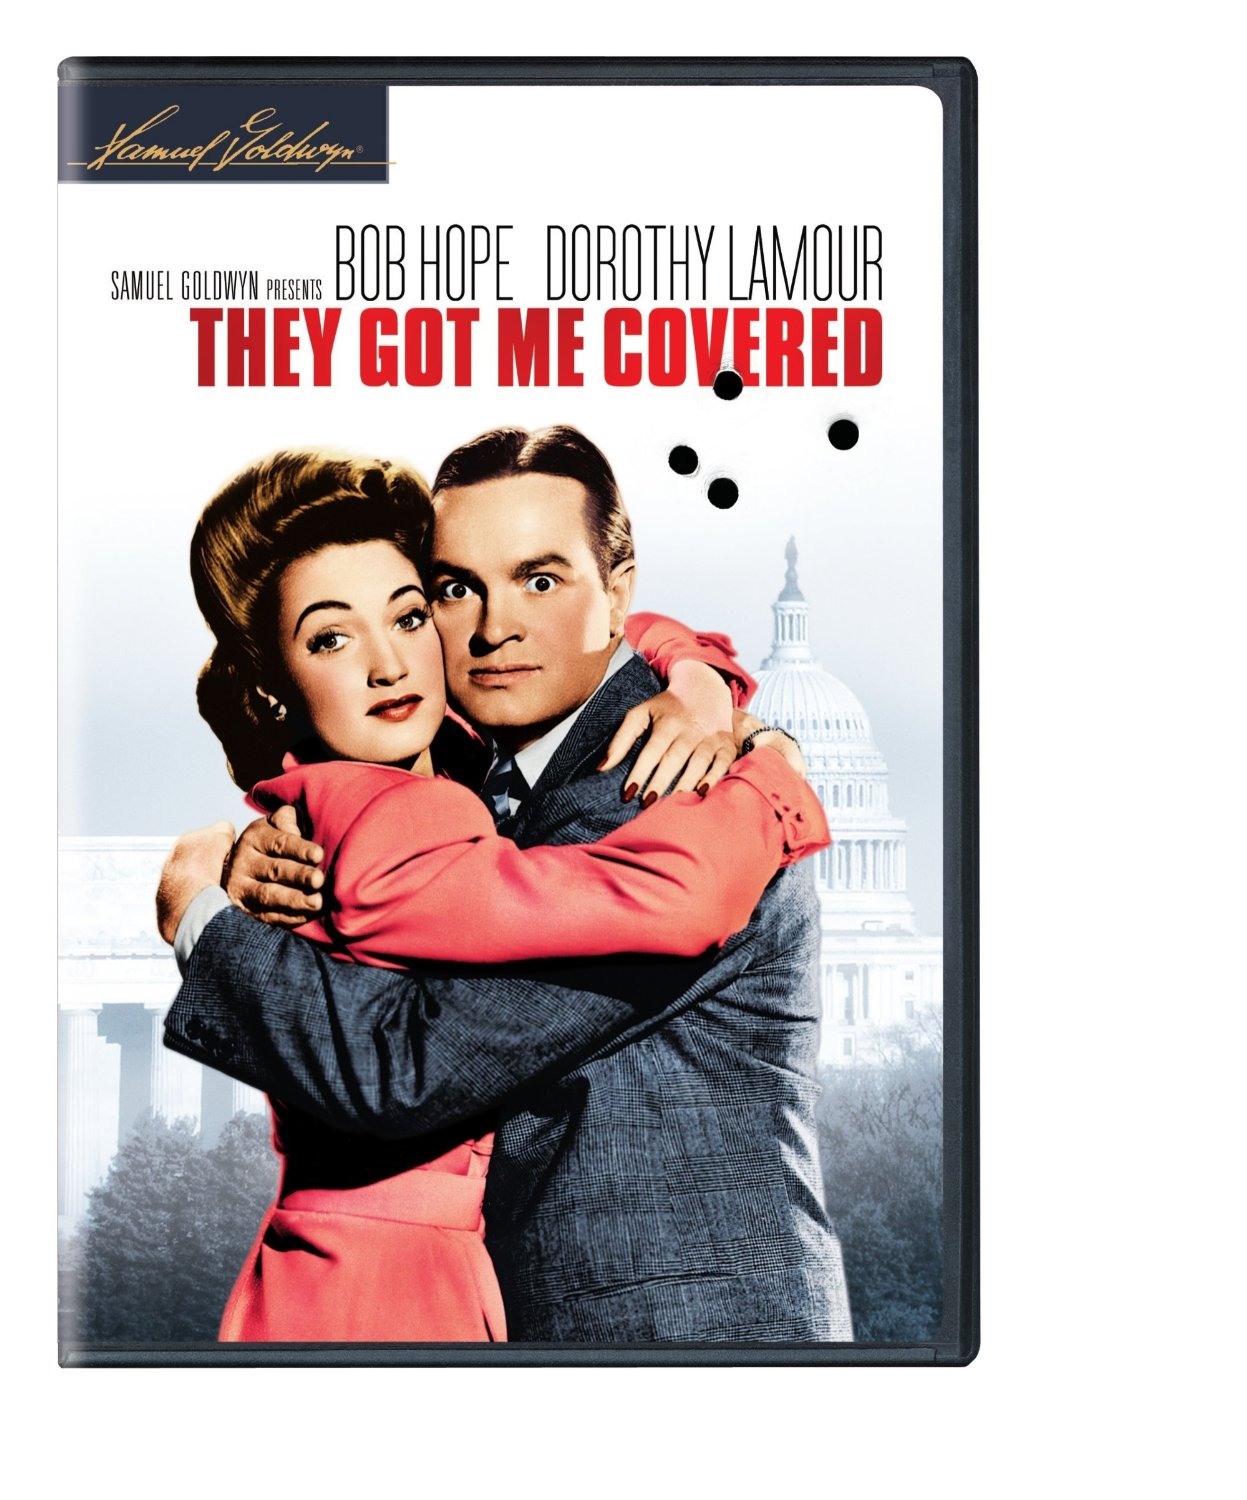 They Got Me Covered, starring Bob Hope, Dorothy Lamour, Donald MacBride